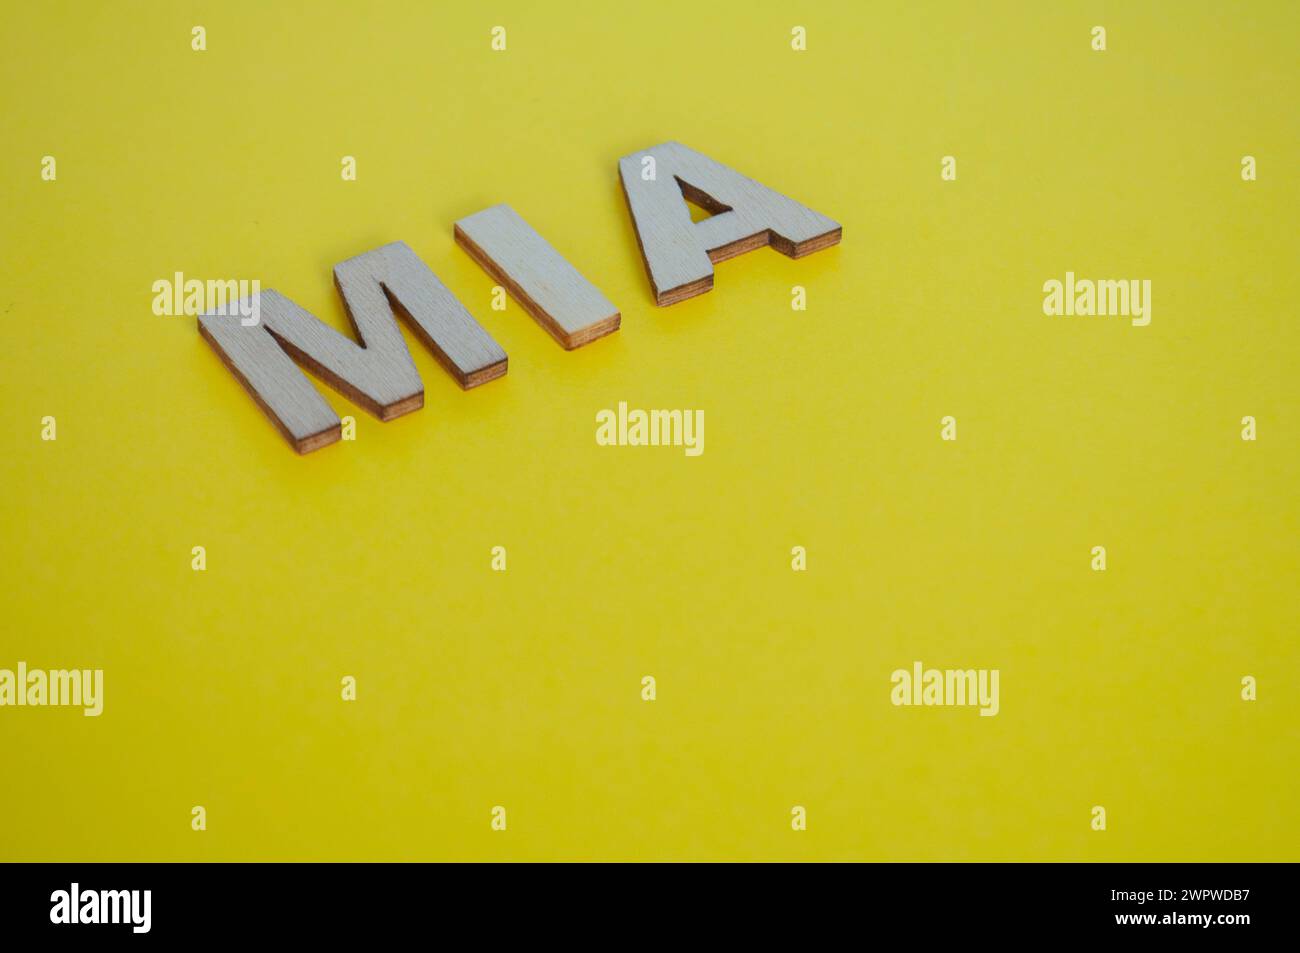 MIA wooden letters representing Missing In Action on yellow background. Stock Photo